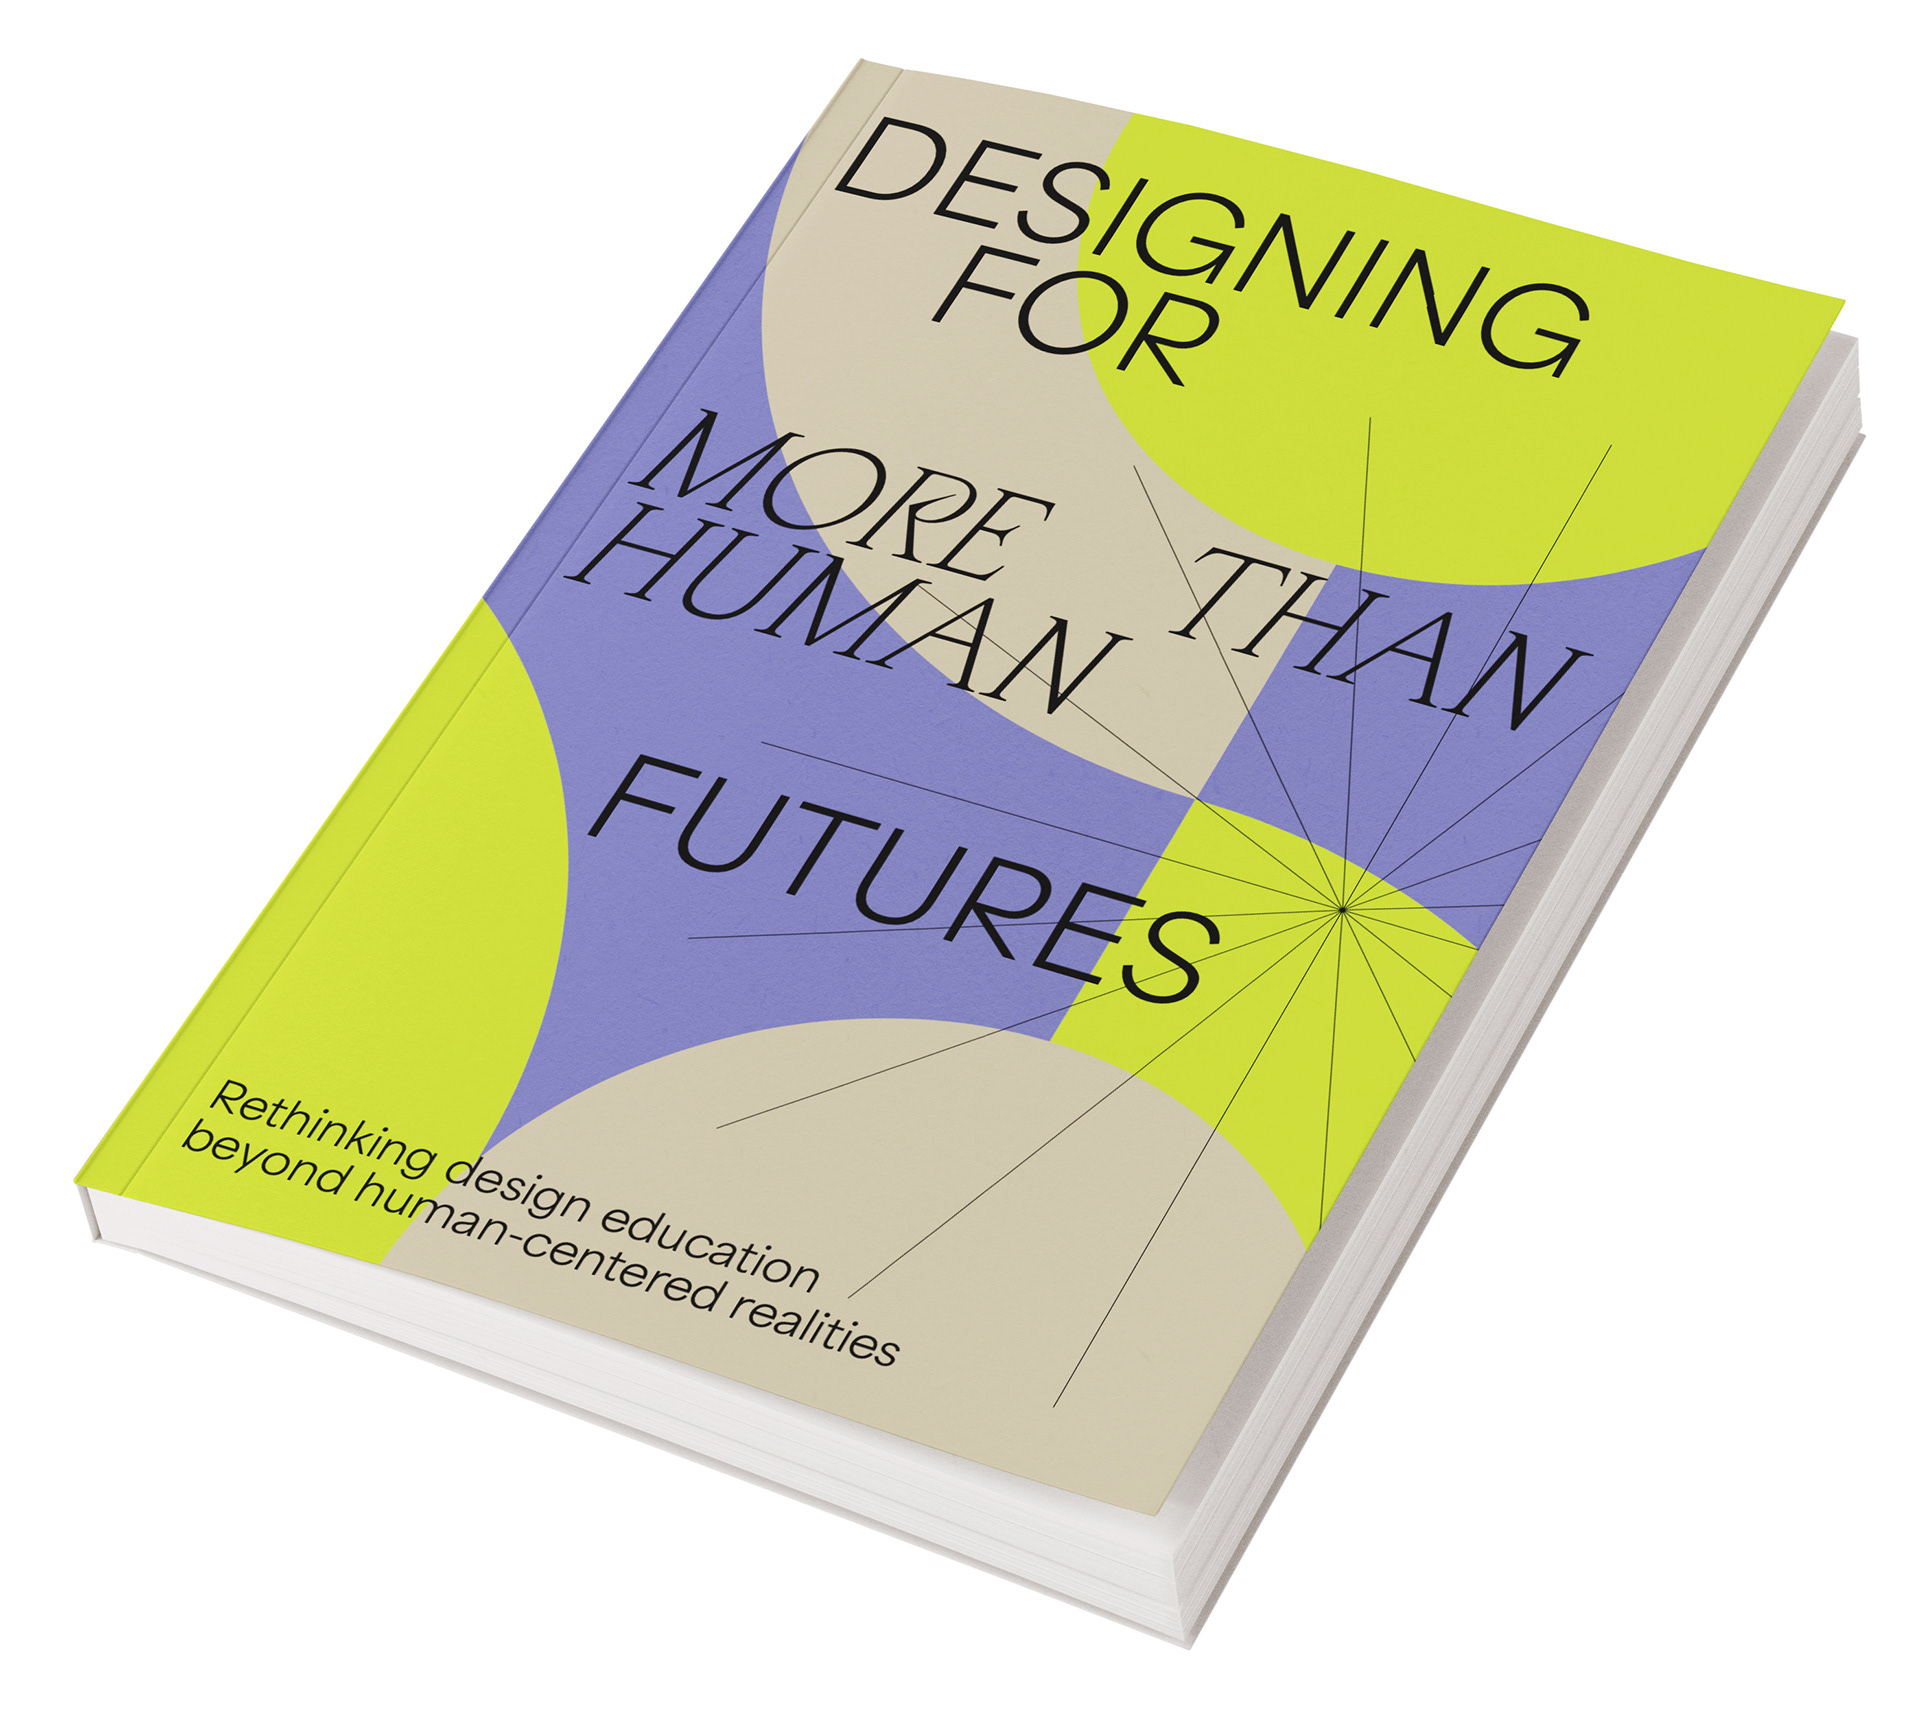 Designing for More than Human Futures